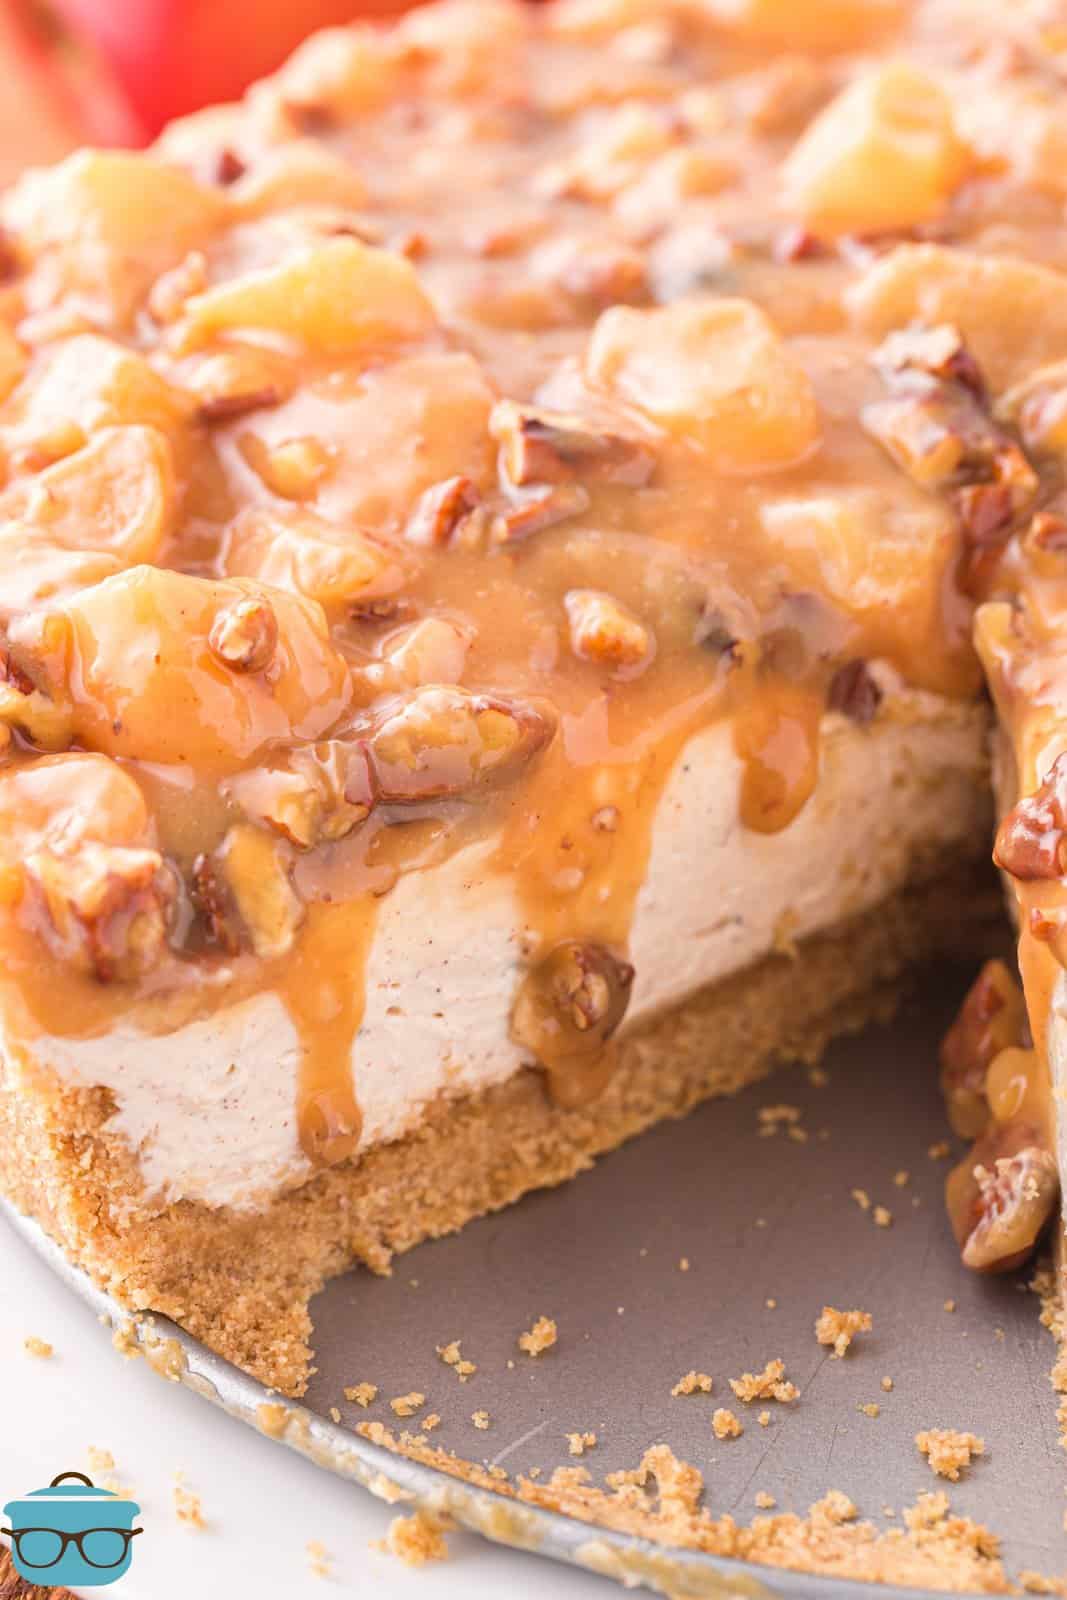 A No Bake Caramel Apple Cheesecake with a slice taken out.